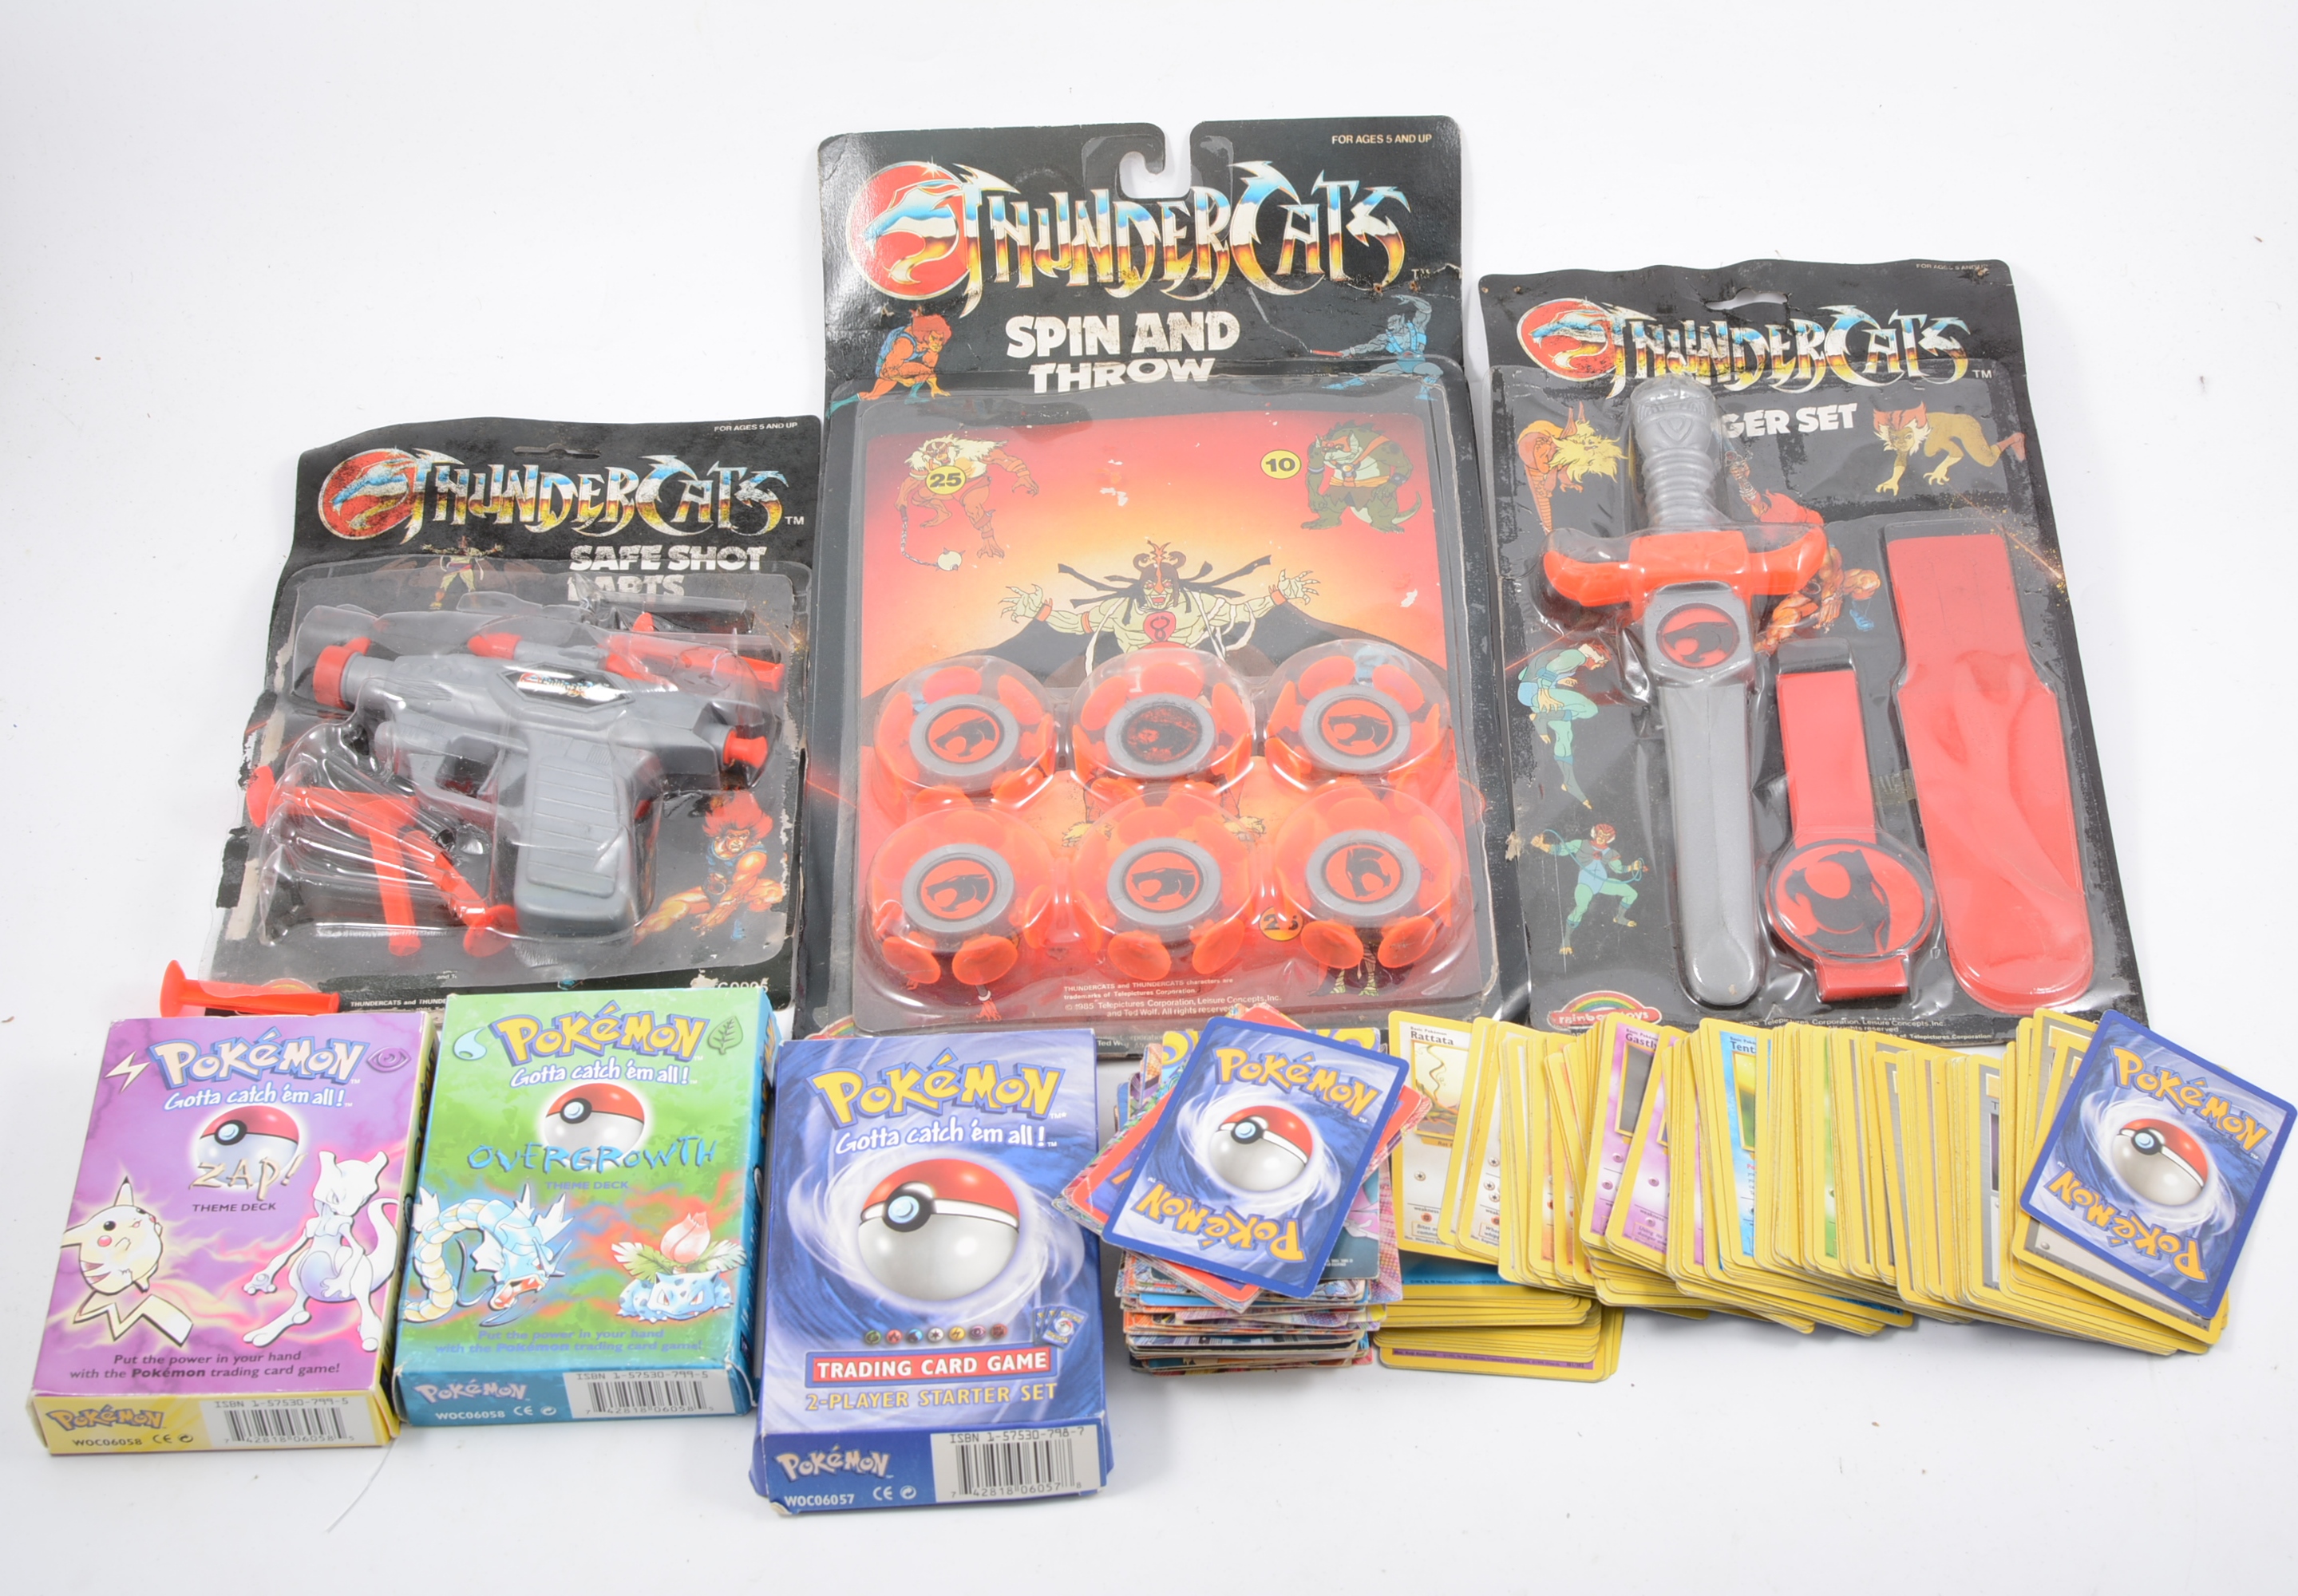 Thundercats toys in blister packs, along with a selection of vintage Pokemon cards, one box.